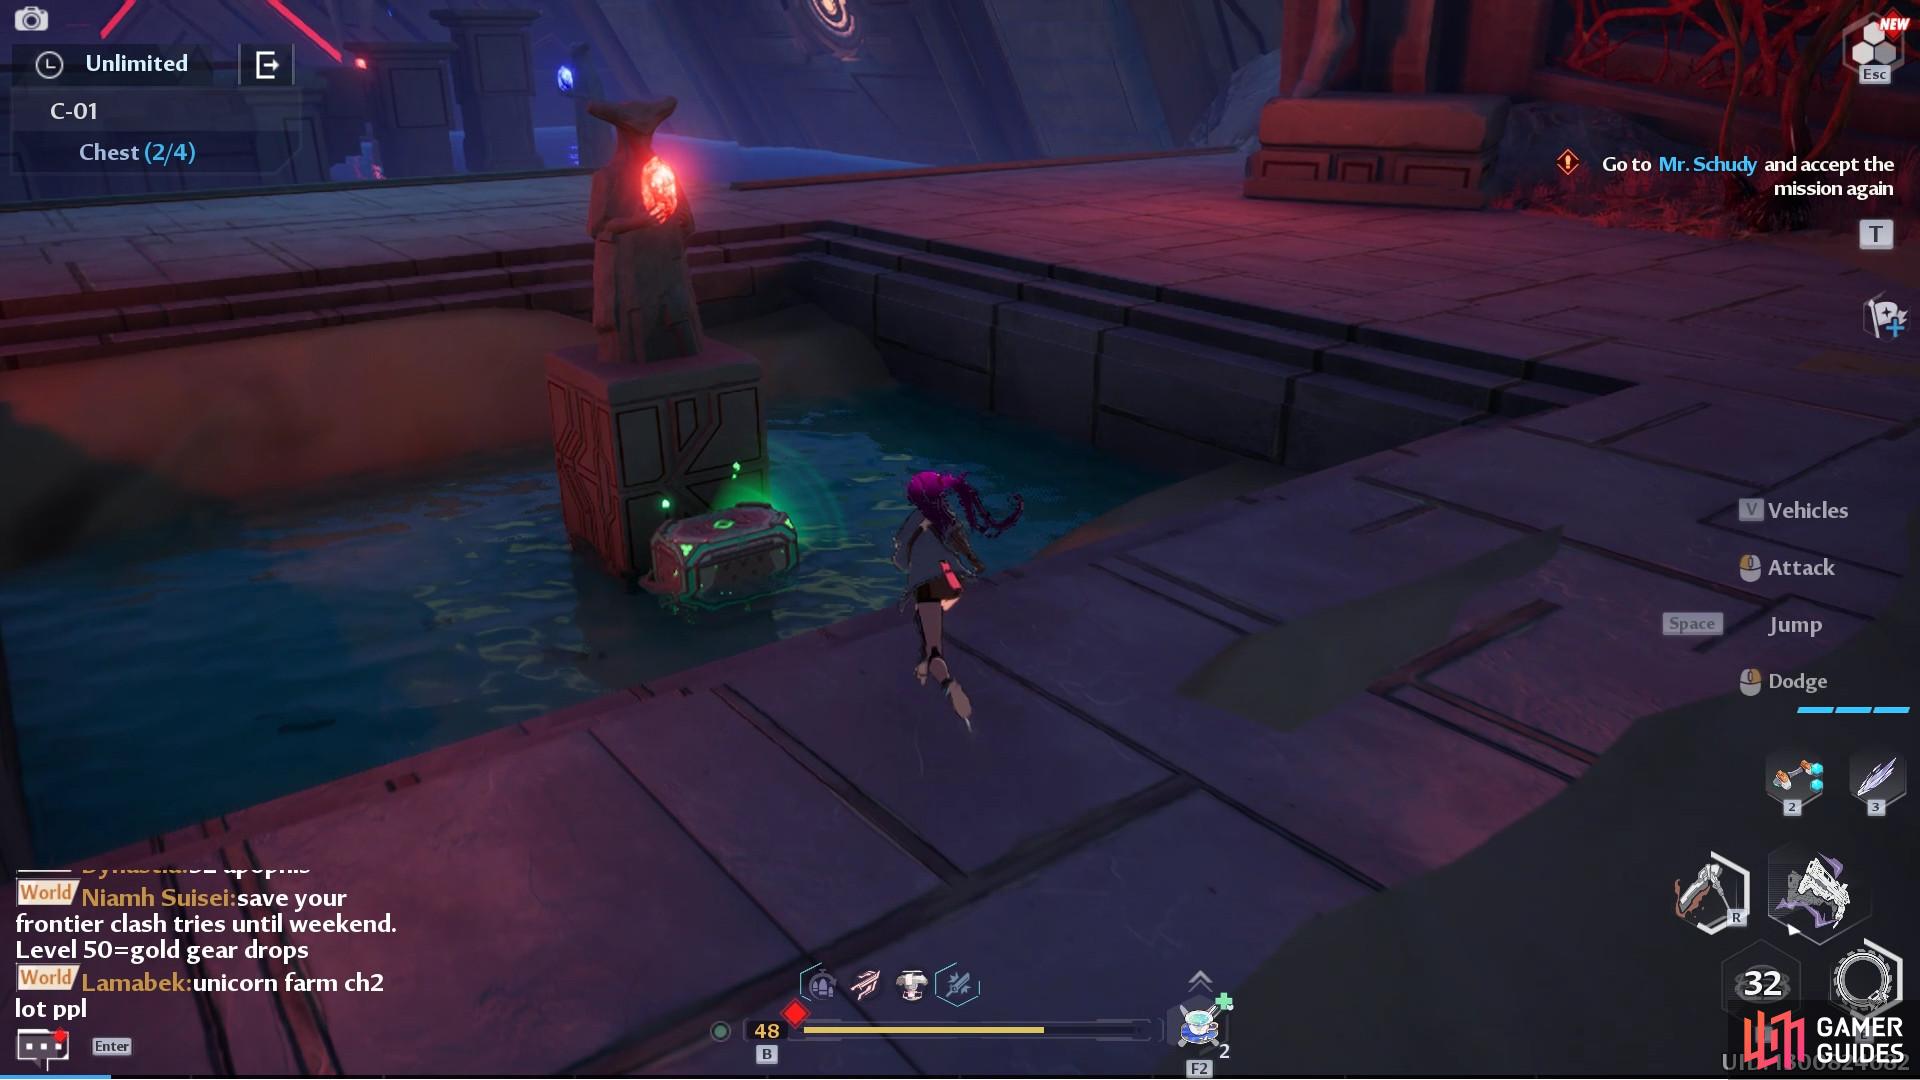 Shoot the statue above the pool of water to lower the water levels and get the second chest on normal